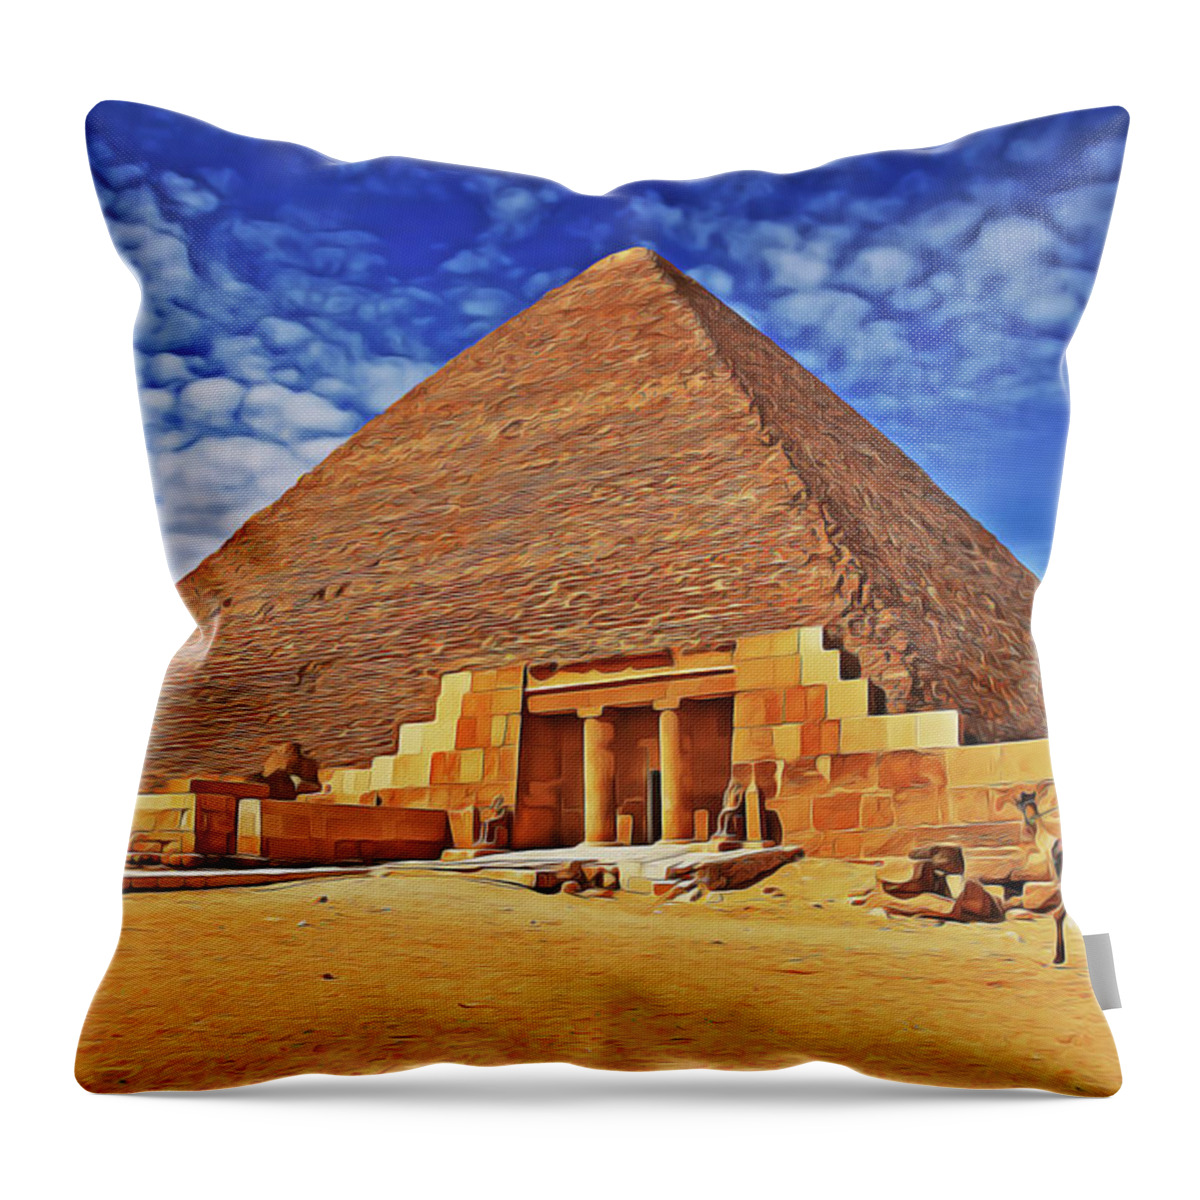 Pyramid Throw Pillow featuring the painting Pyramid by Harry Warrick